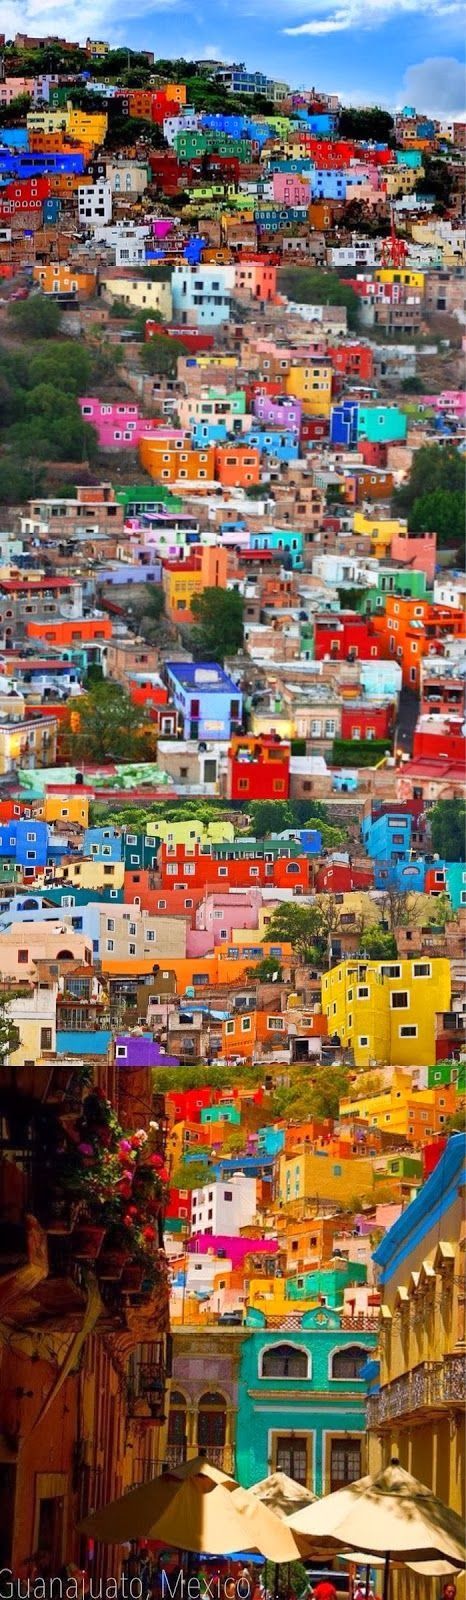 Guanajuato, Mexico This would be fun to paint.